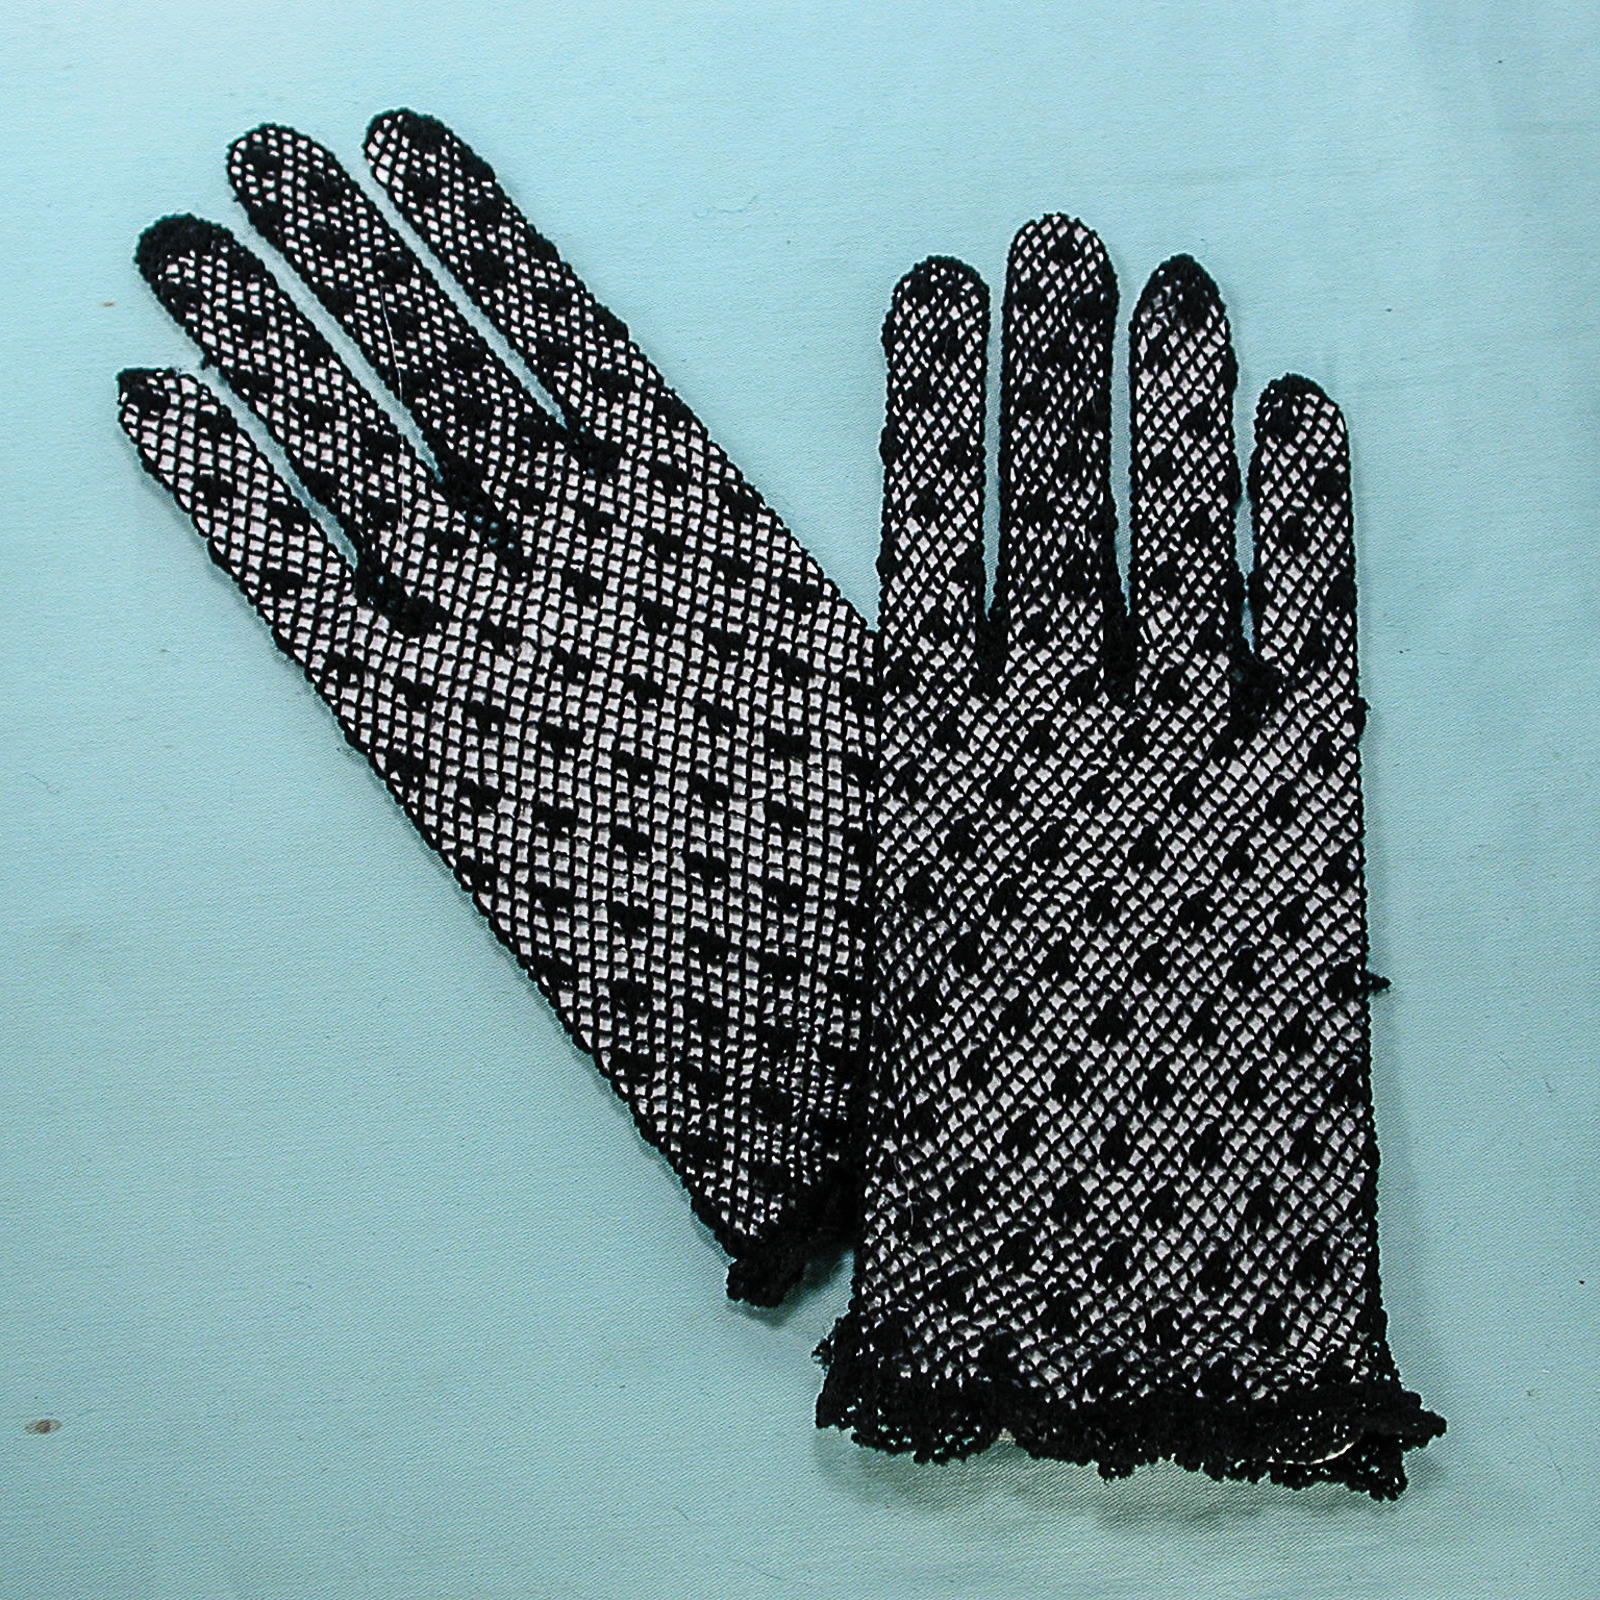 Dotted Swiss Wrist Gloves for Sizes 7-14, a fashion accessorie - Evening Elegance